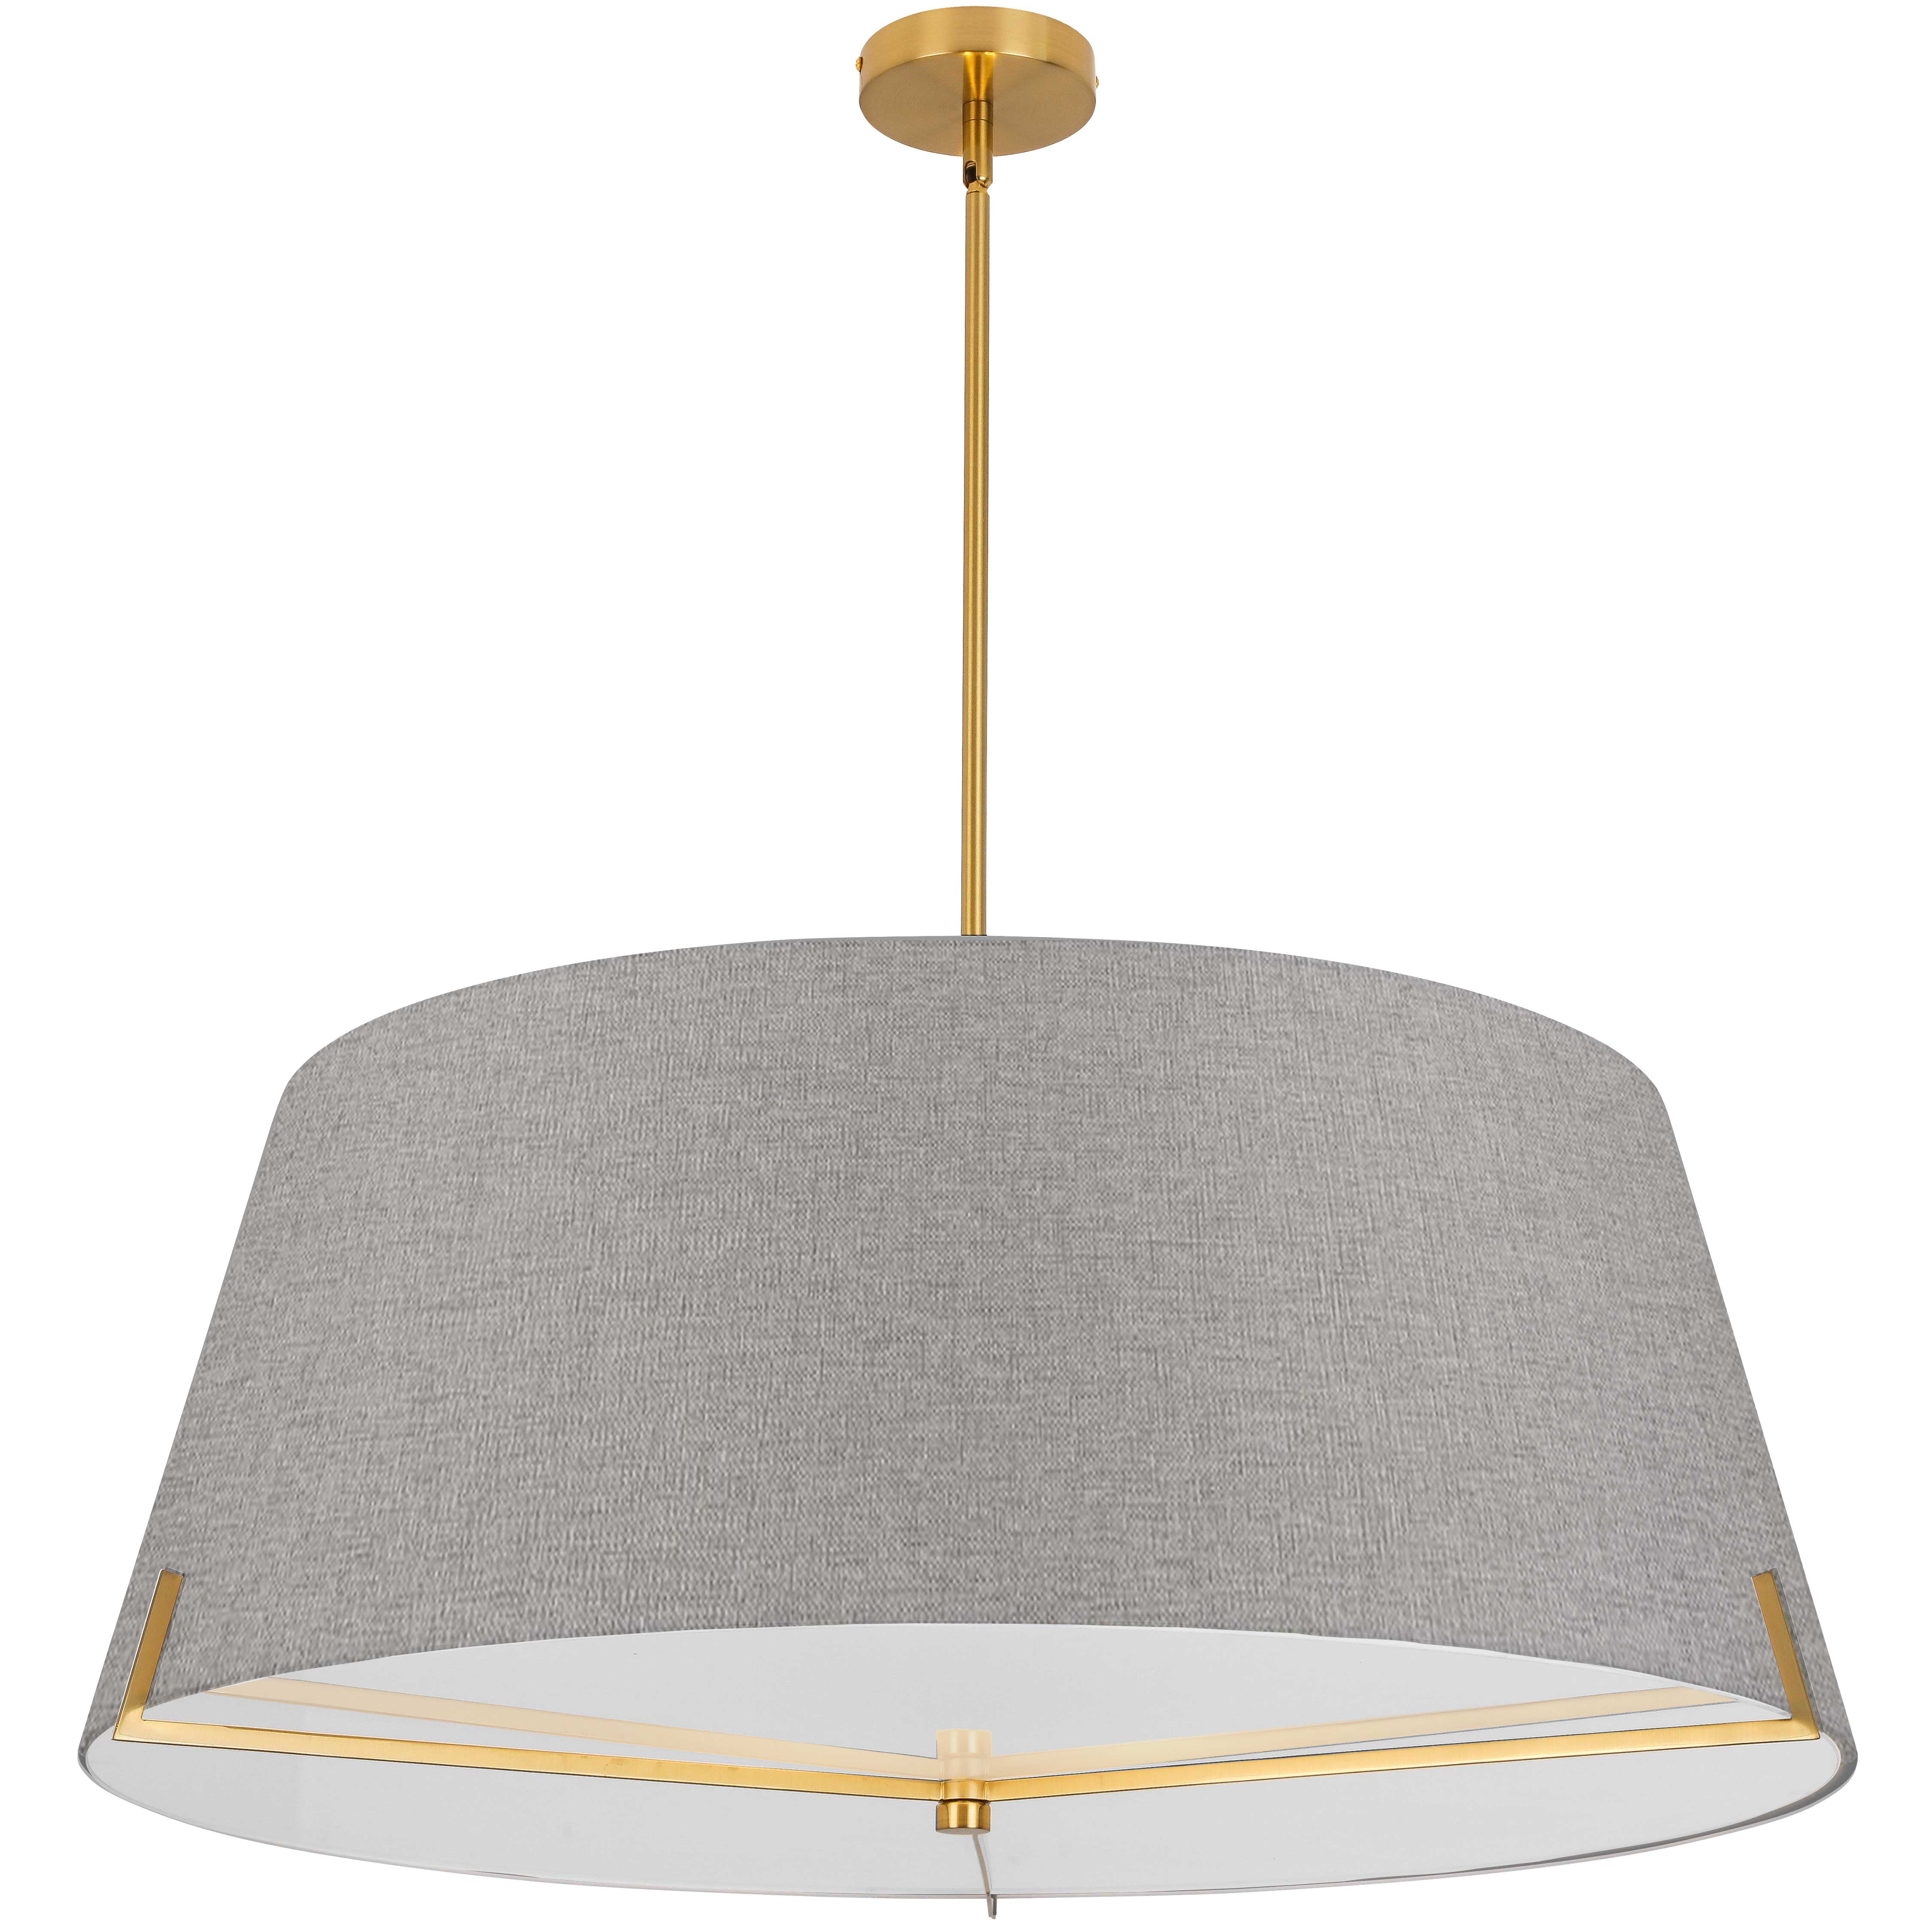 4 LT Incandescent Pendant, AGB w/ GRY fabric shade